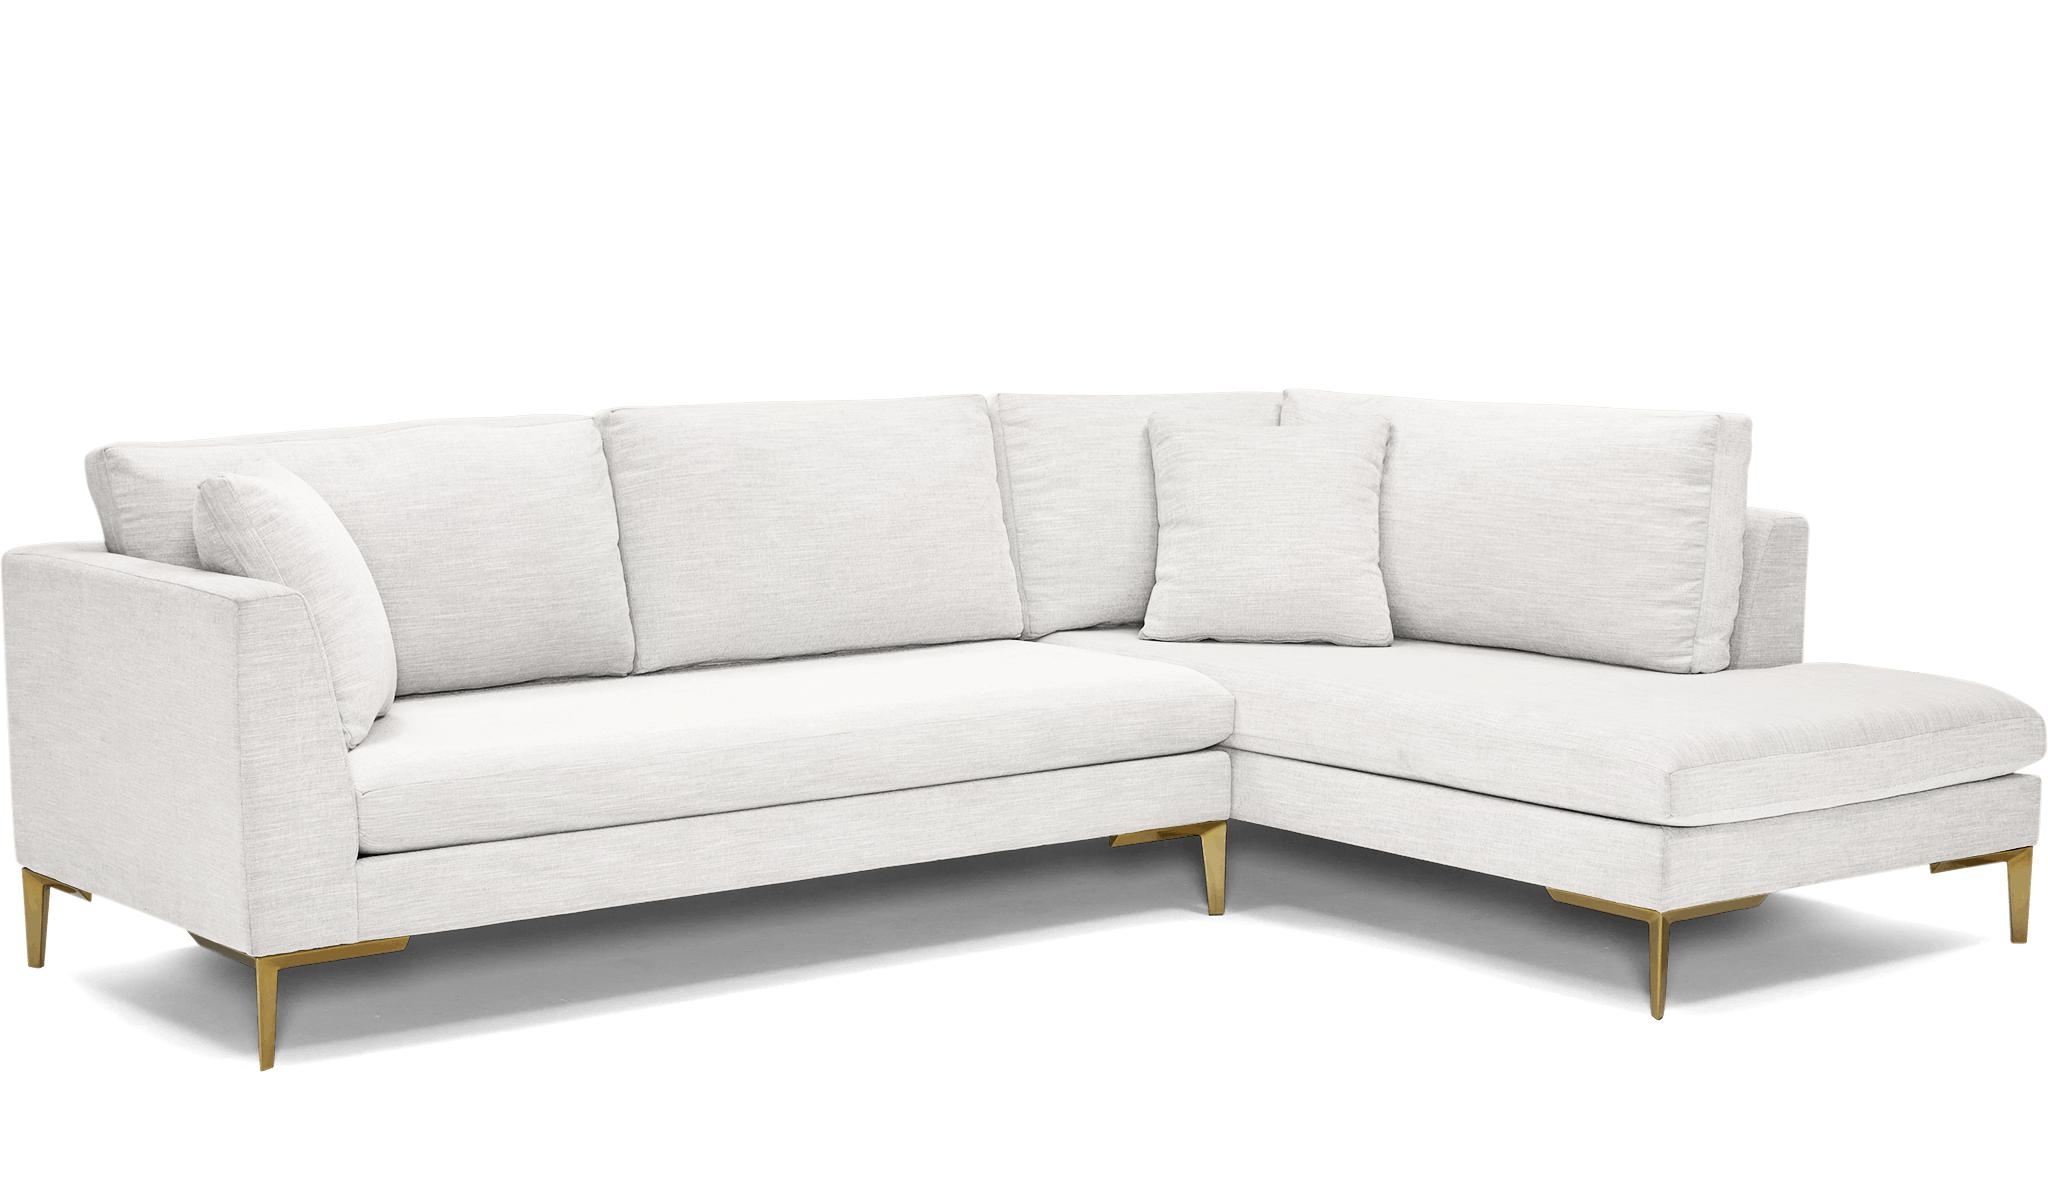 White Ainsley Mid Century Modern Sectional with Bumper - Tussah Blizzard - Right - Image 1